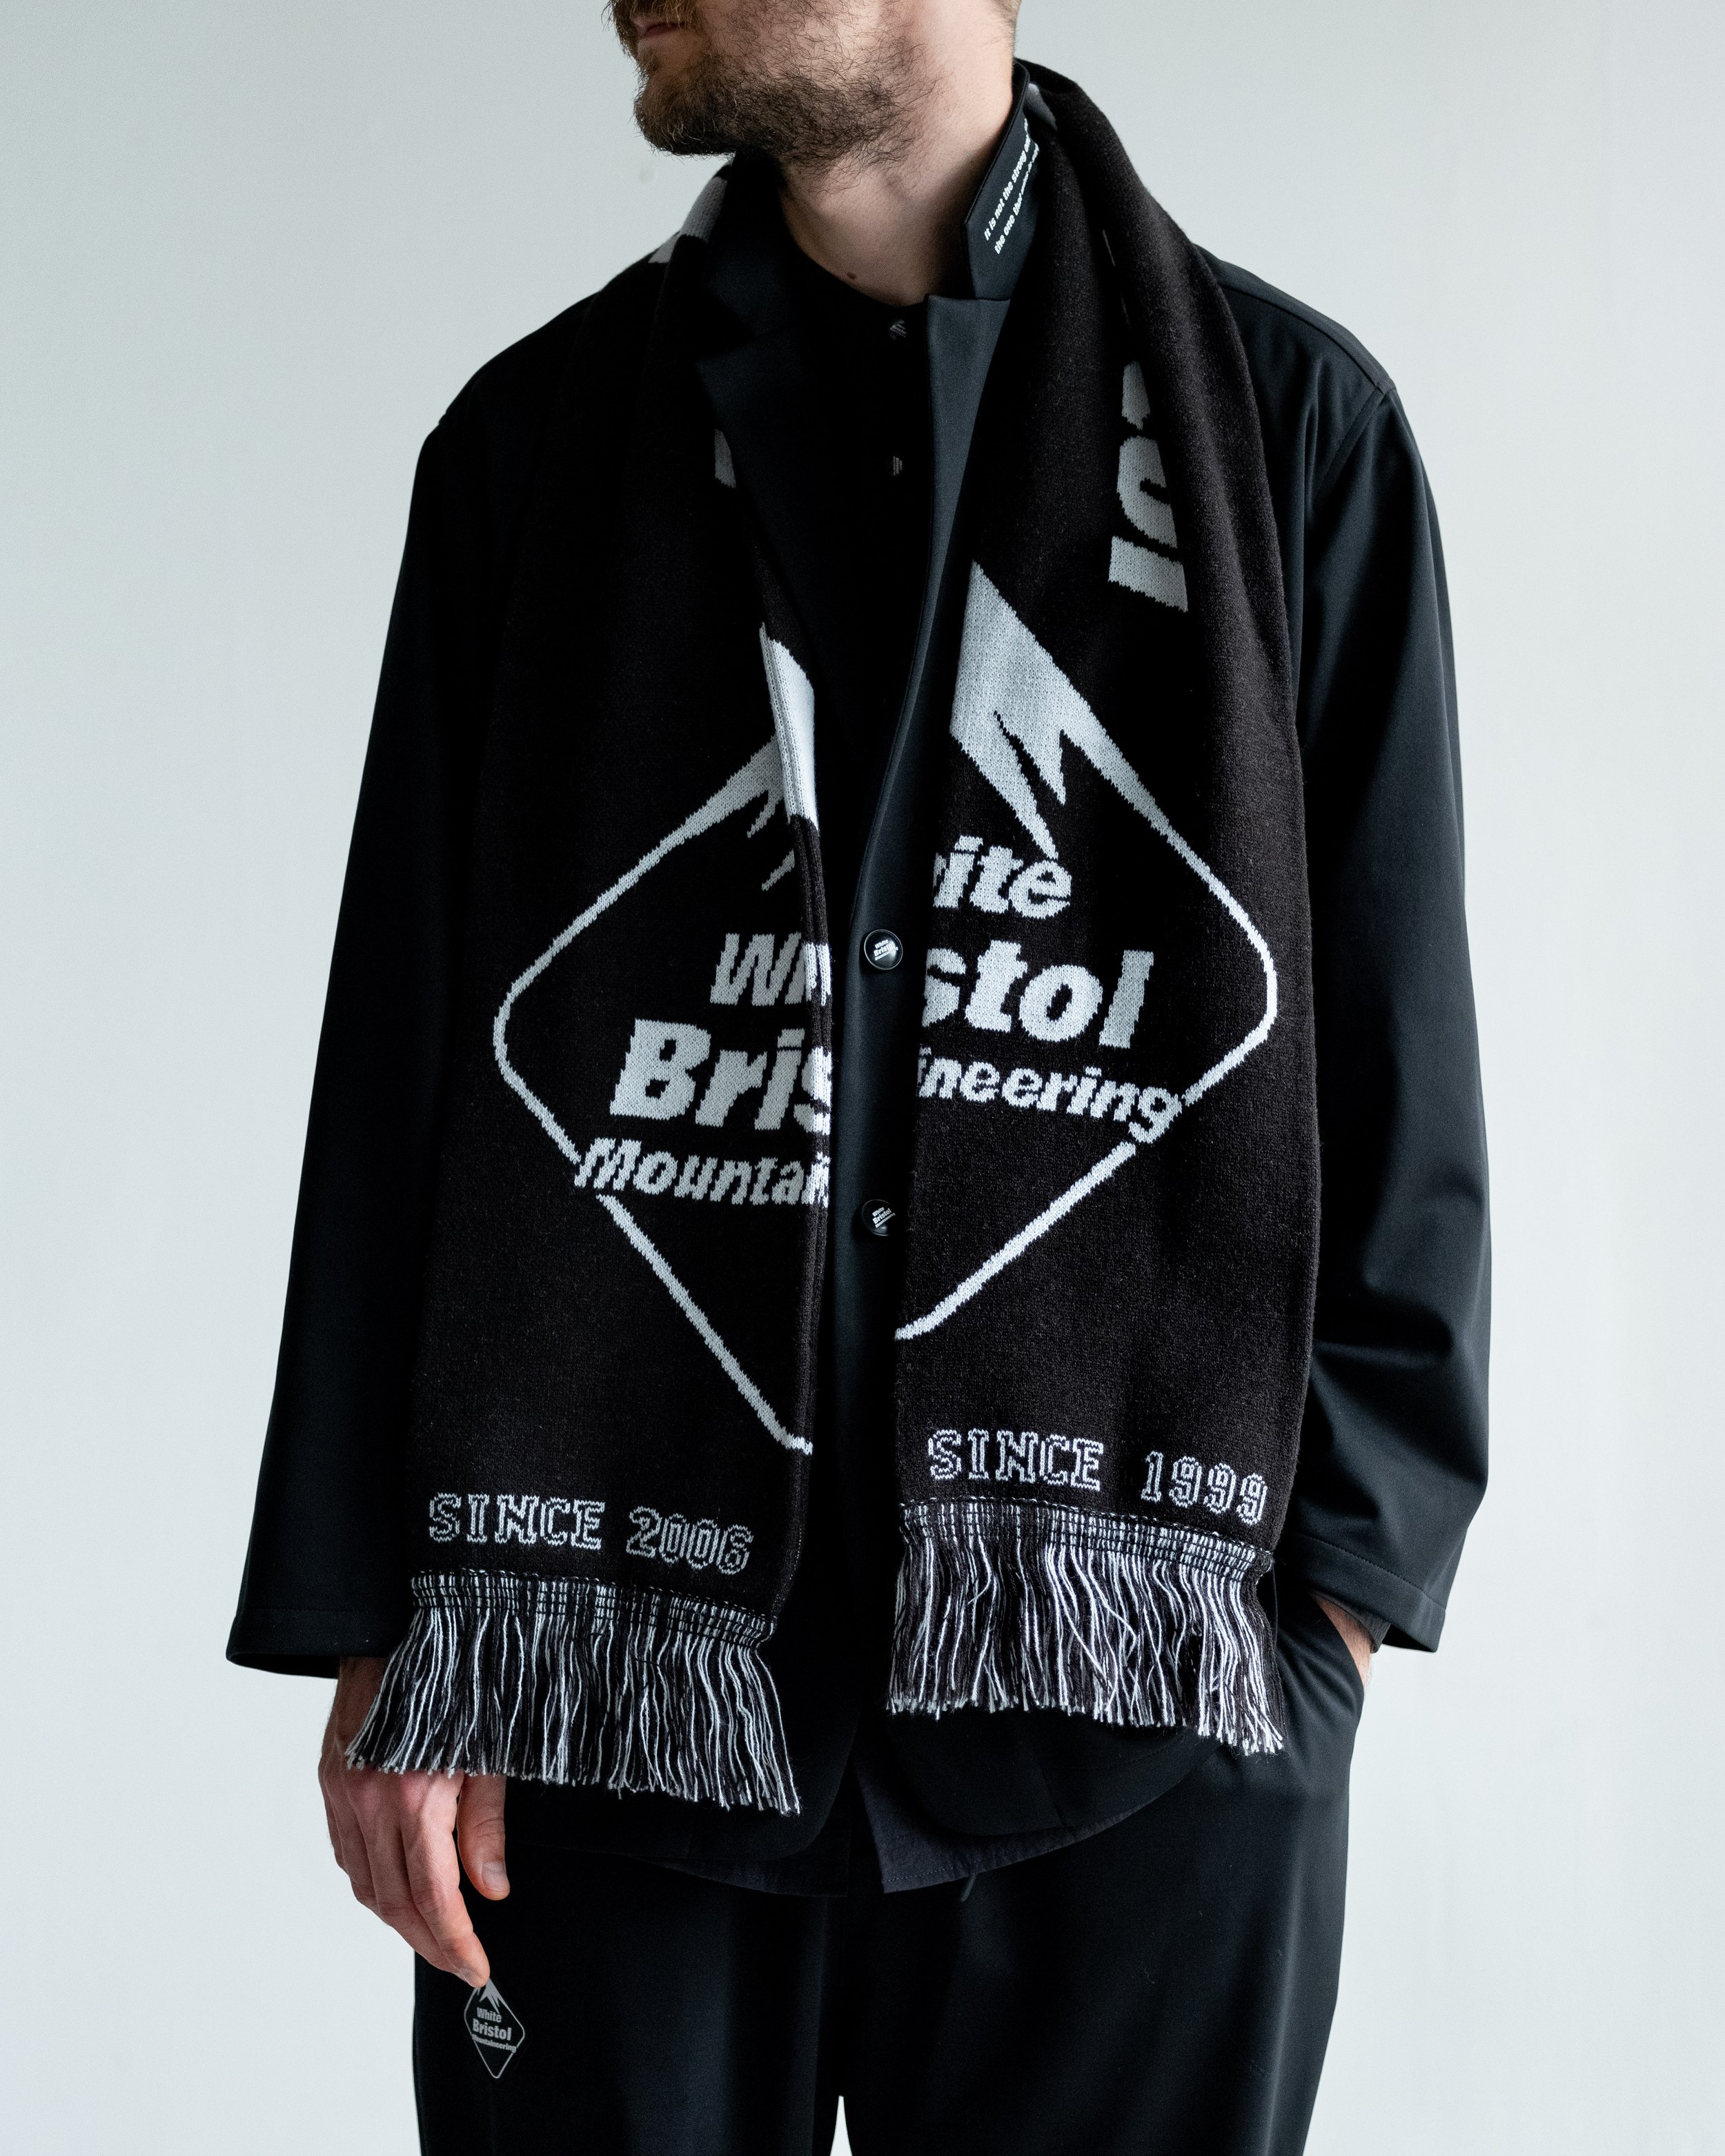 FEATURE | White Mountaineering x F.C.Real Bristol by eye_C